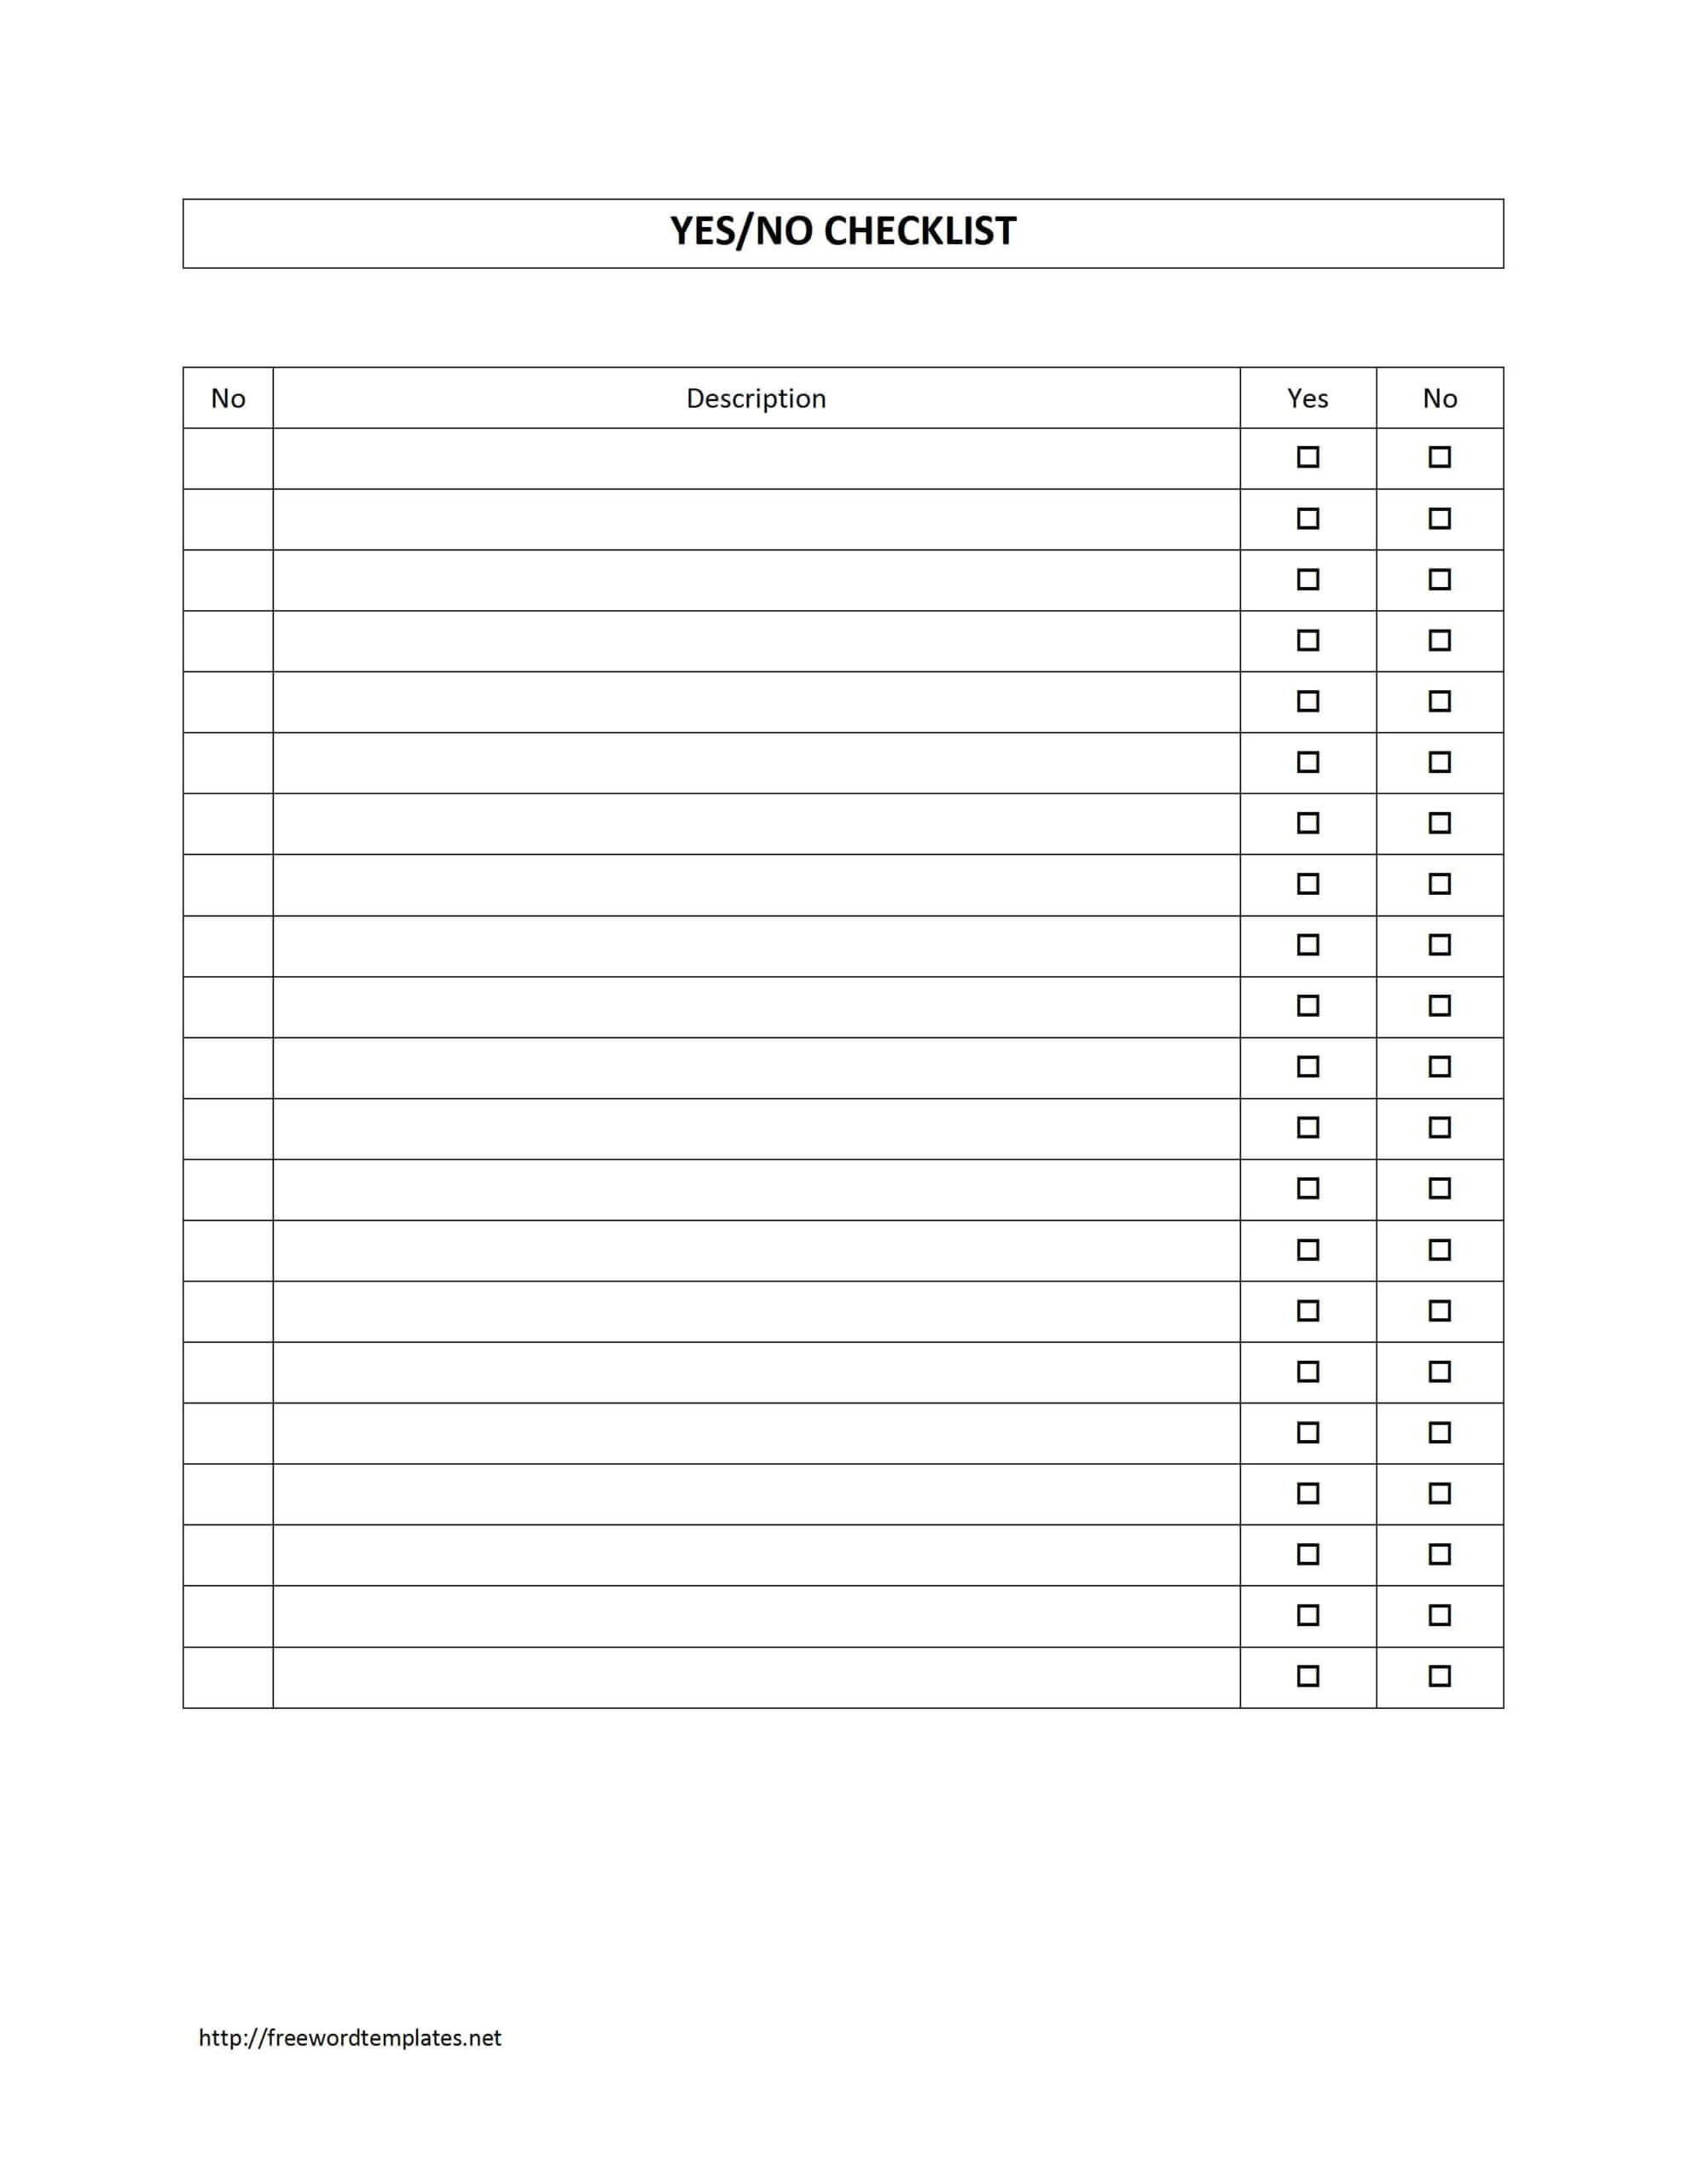 Survey Sheet With Yes/no Checklist Template | Free Microsoft Throughout Poll Template For Word